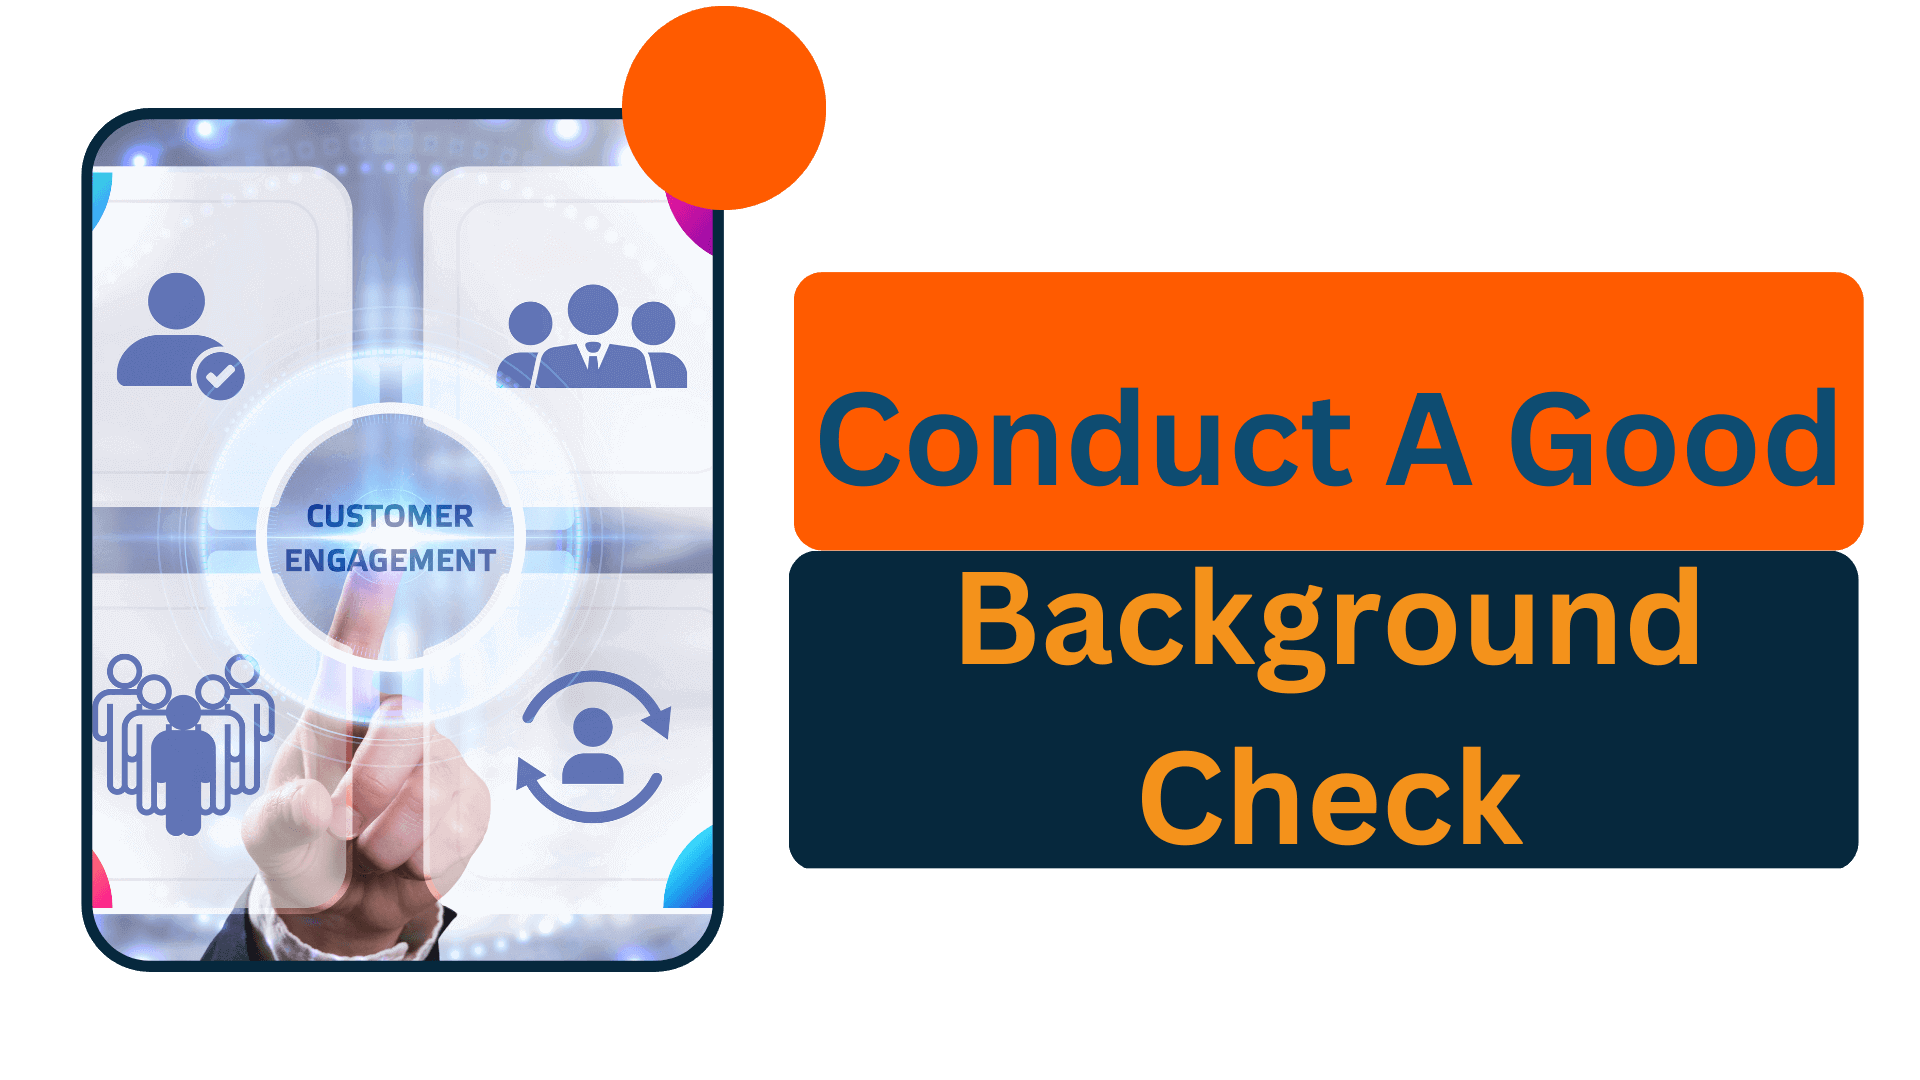 Conduct A Good Background Check